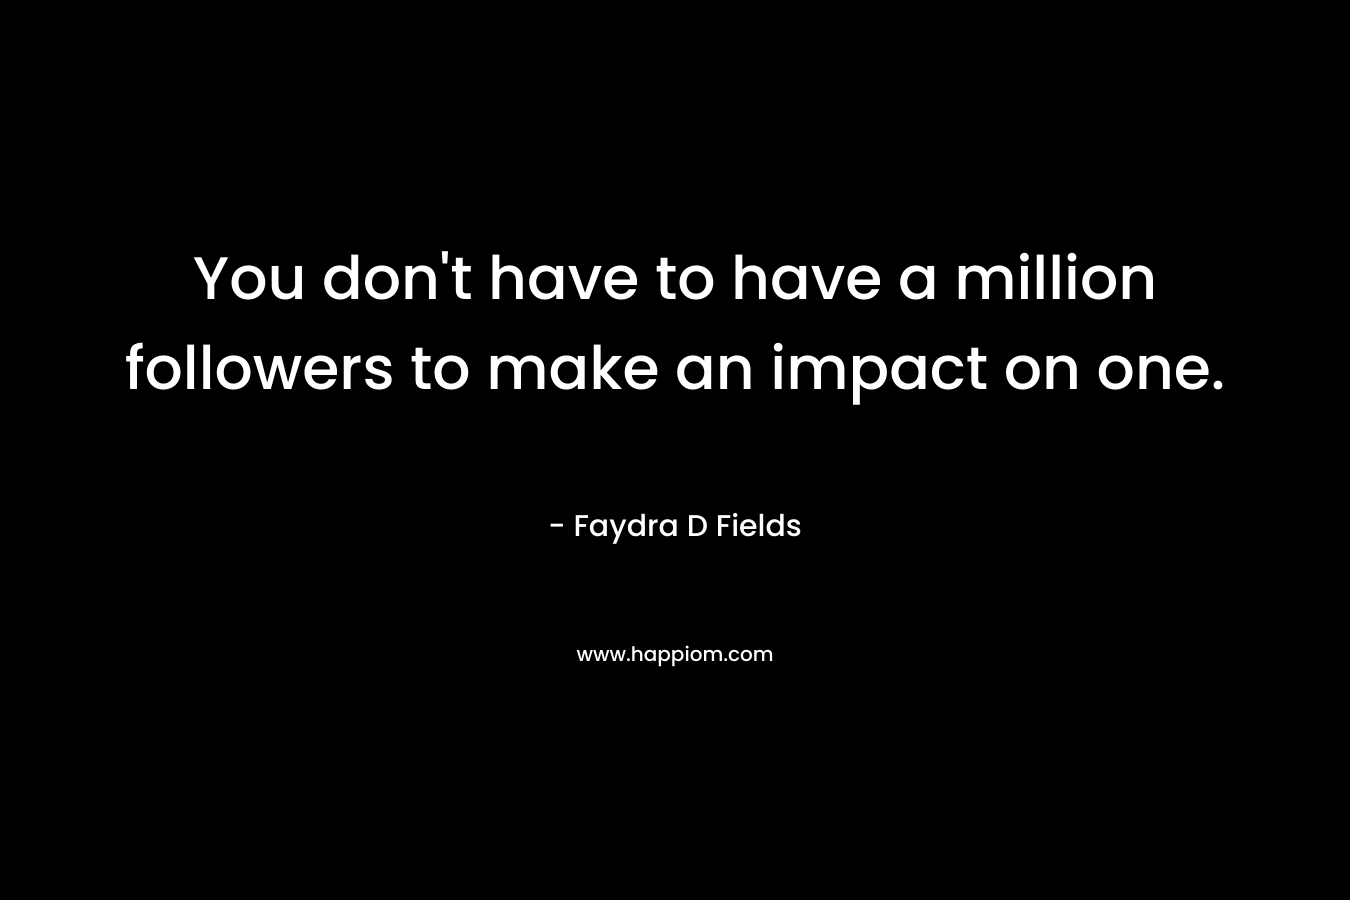 You don’t have to have a million followers to make an impact on one. – Faydra D Fields